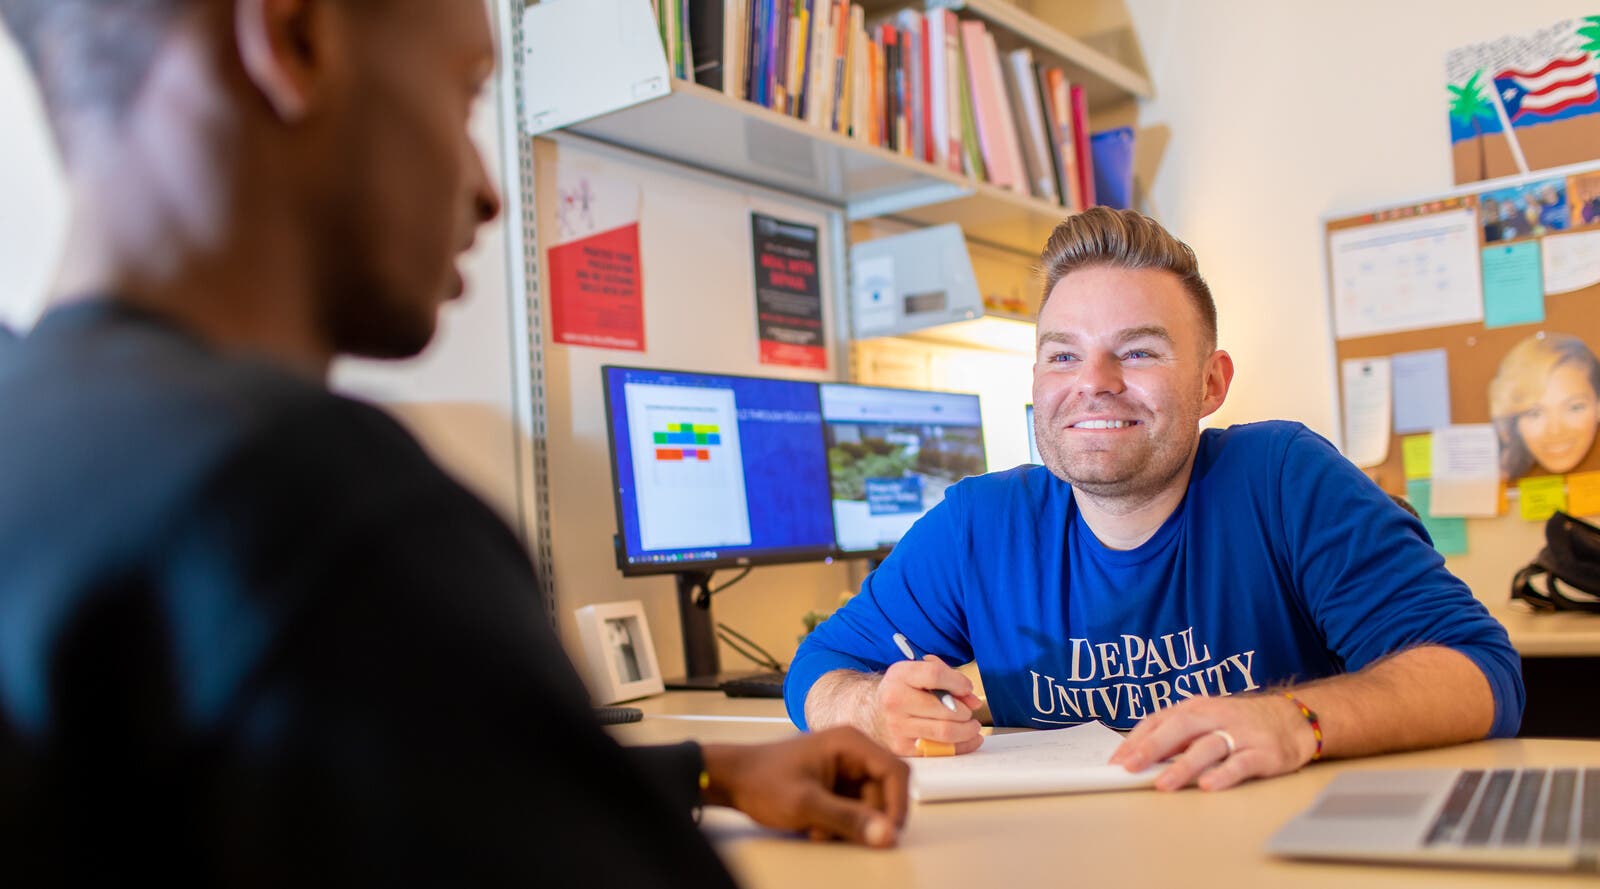 DePaul admissions assistant talking with student at desk